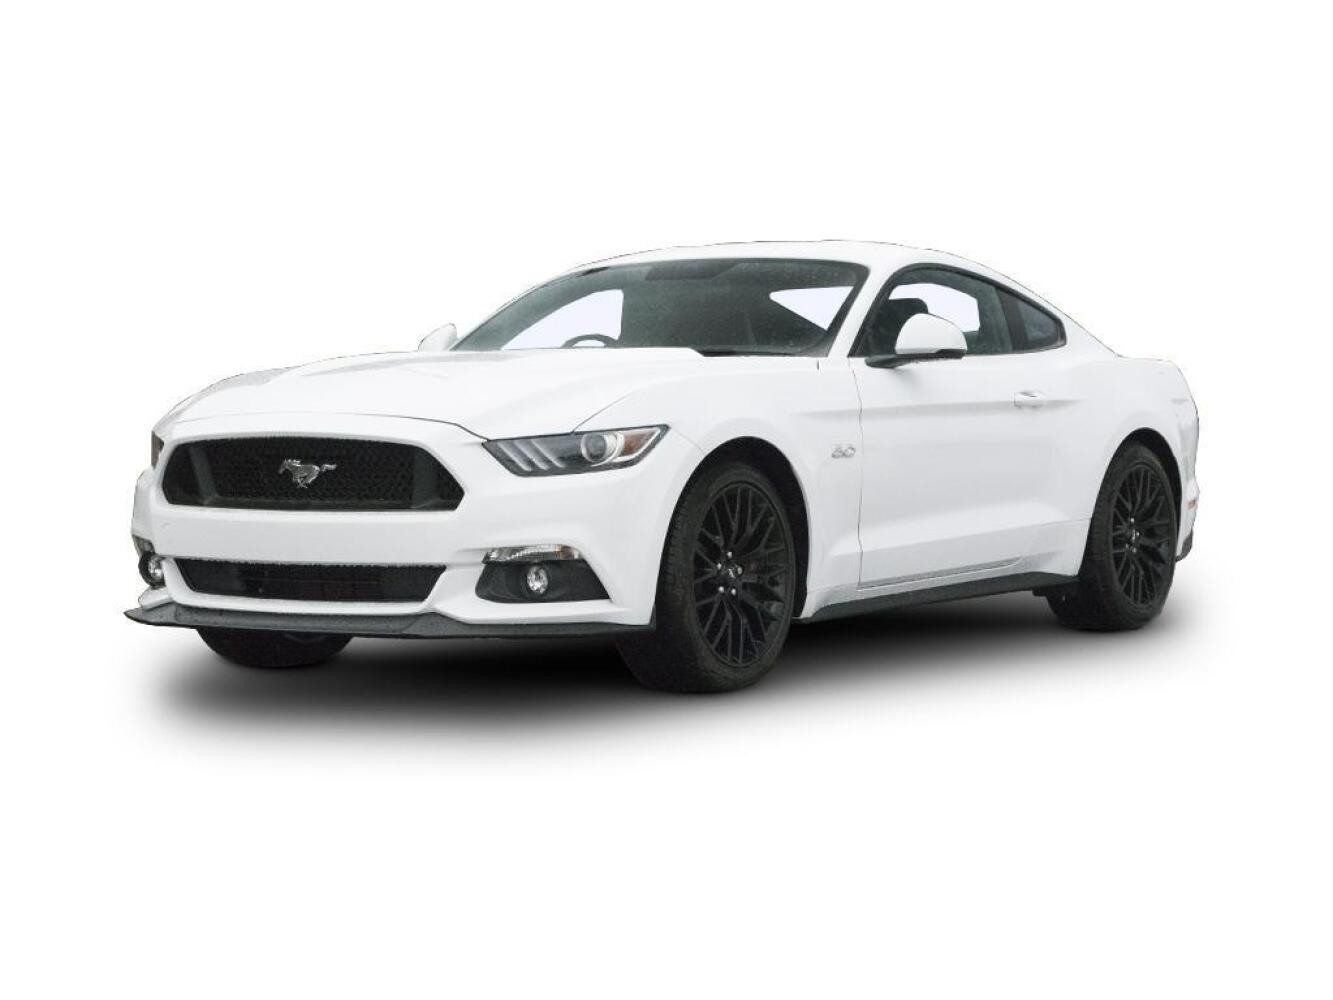 Ford Mustang 2.3 Ecoboost For Sale Uk